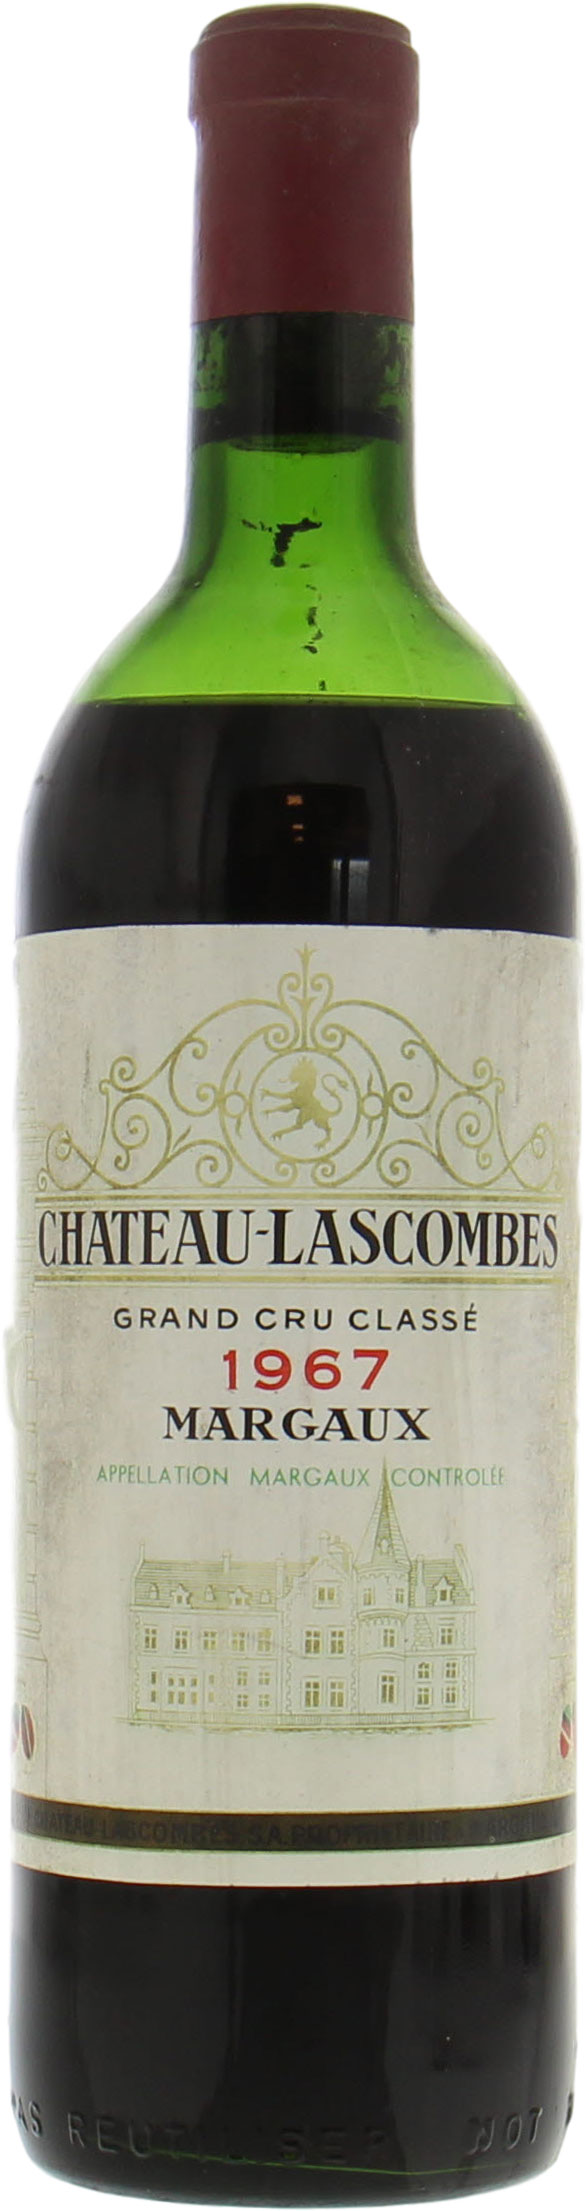 Chateau Lascombes - Chateau Lascombes 1967 Mid shoulder